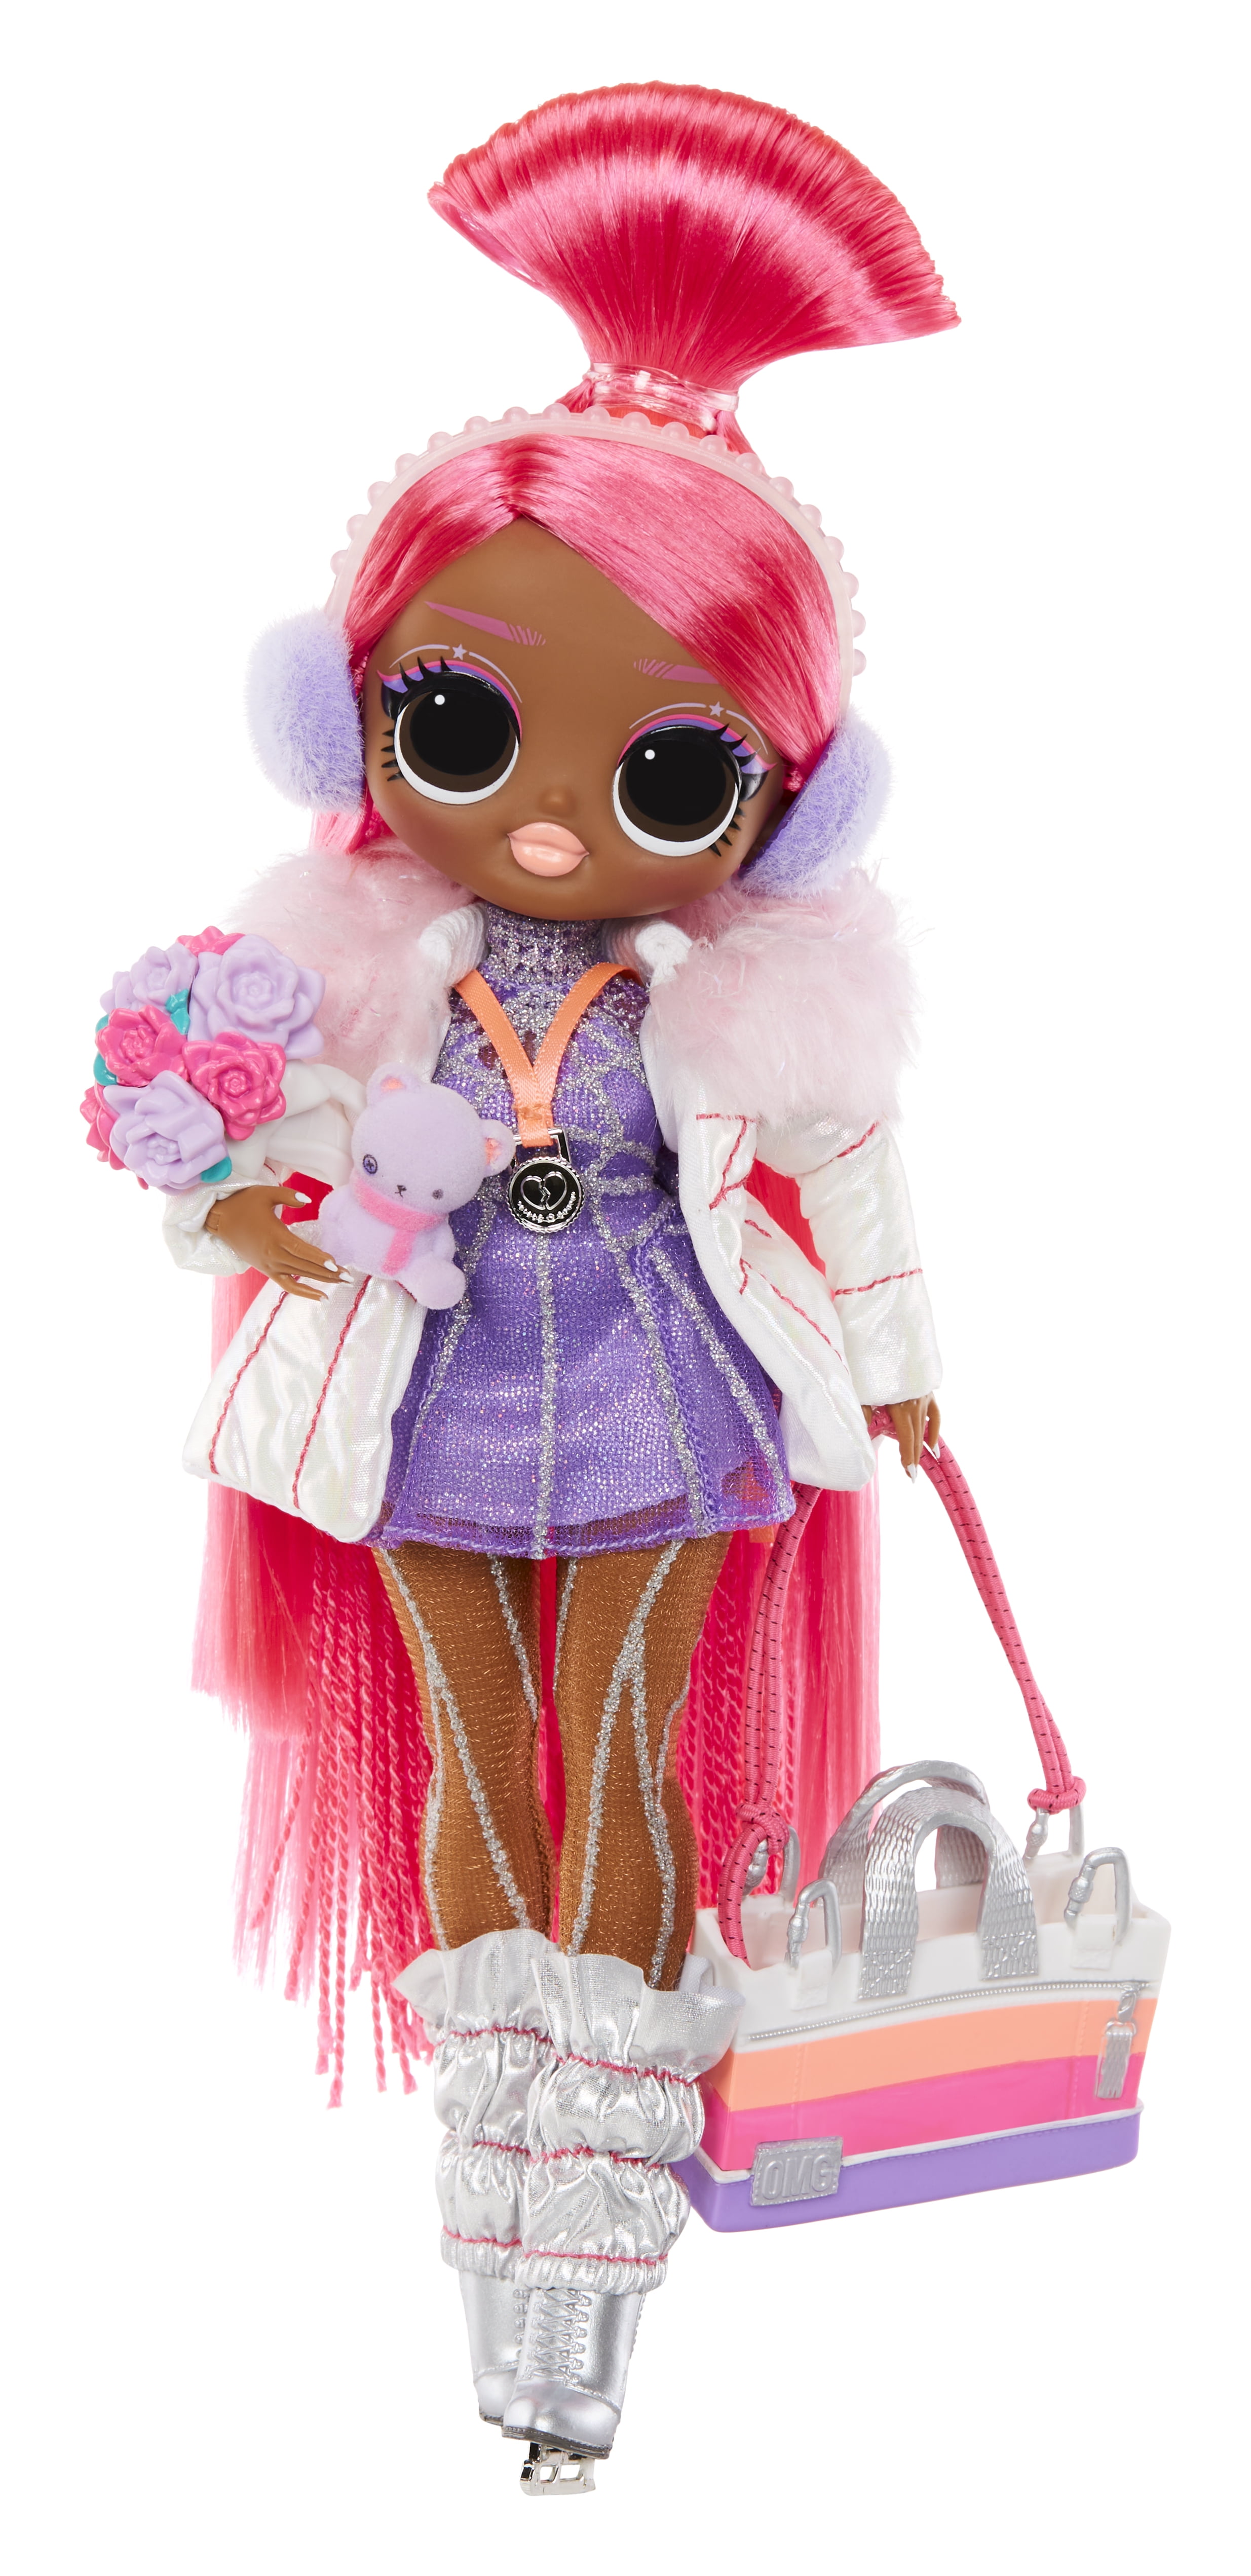 Lol Surprise Omg Sports Fashion Doll Skate Boss With 20 Surprises – Great  Gift For Kids Ages 4+ - Walmart.Com